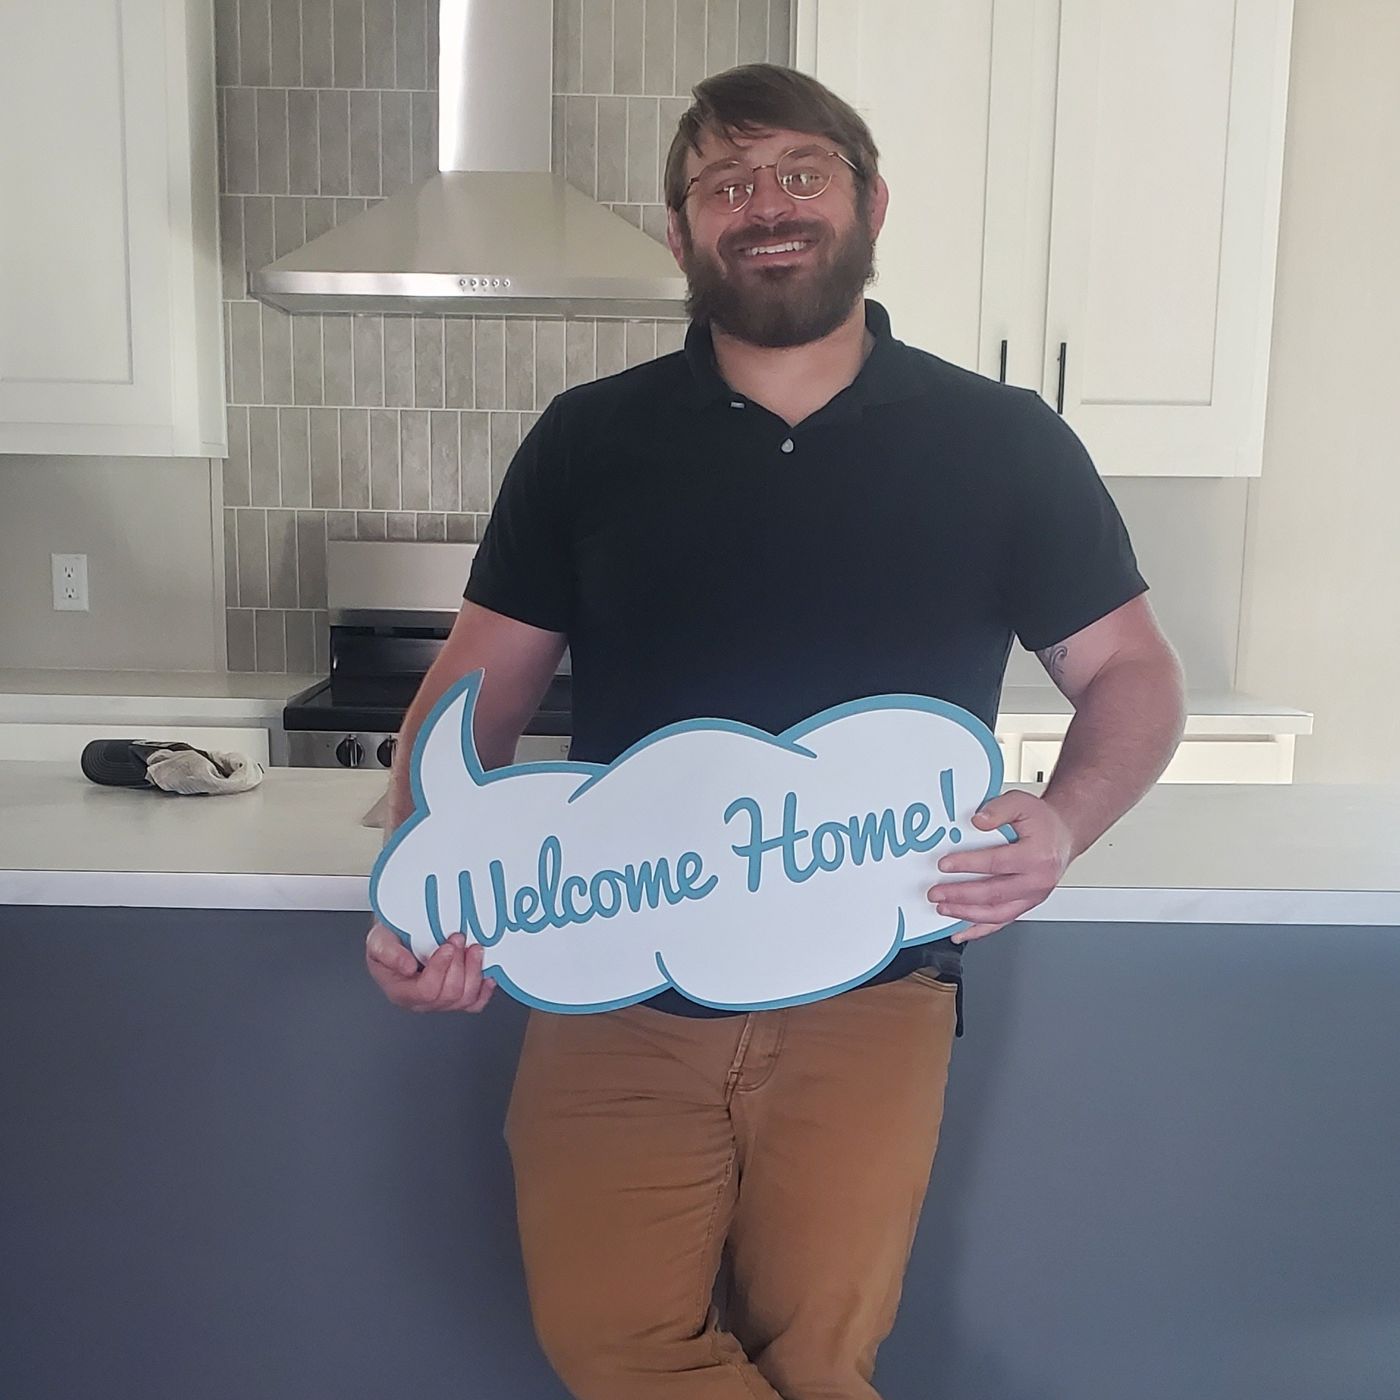 COLE C. welcome home image